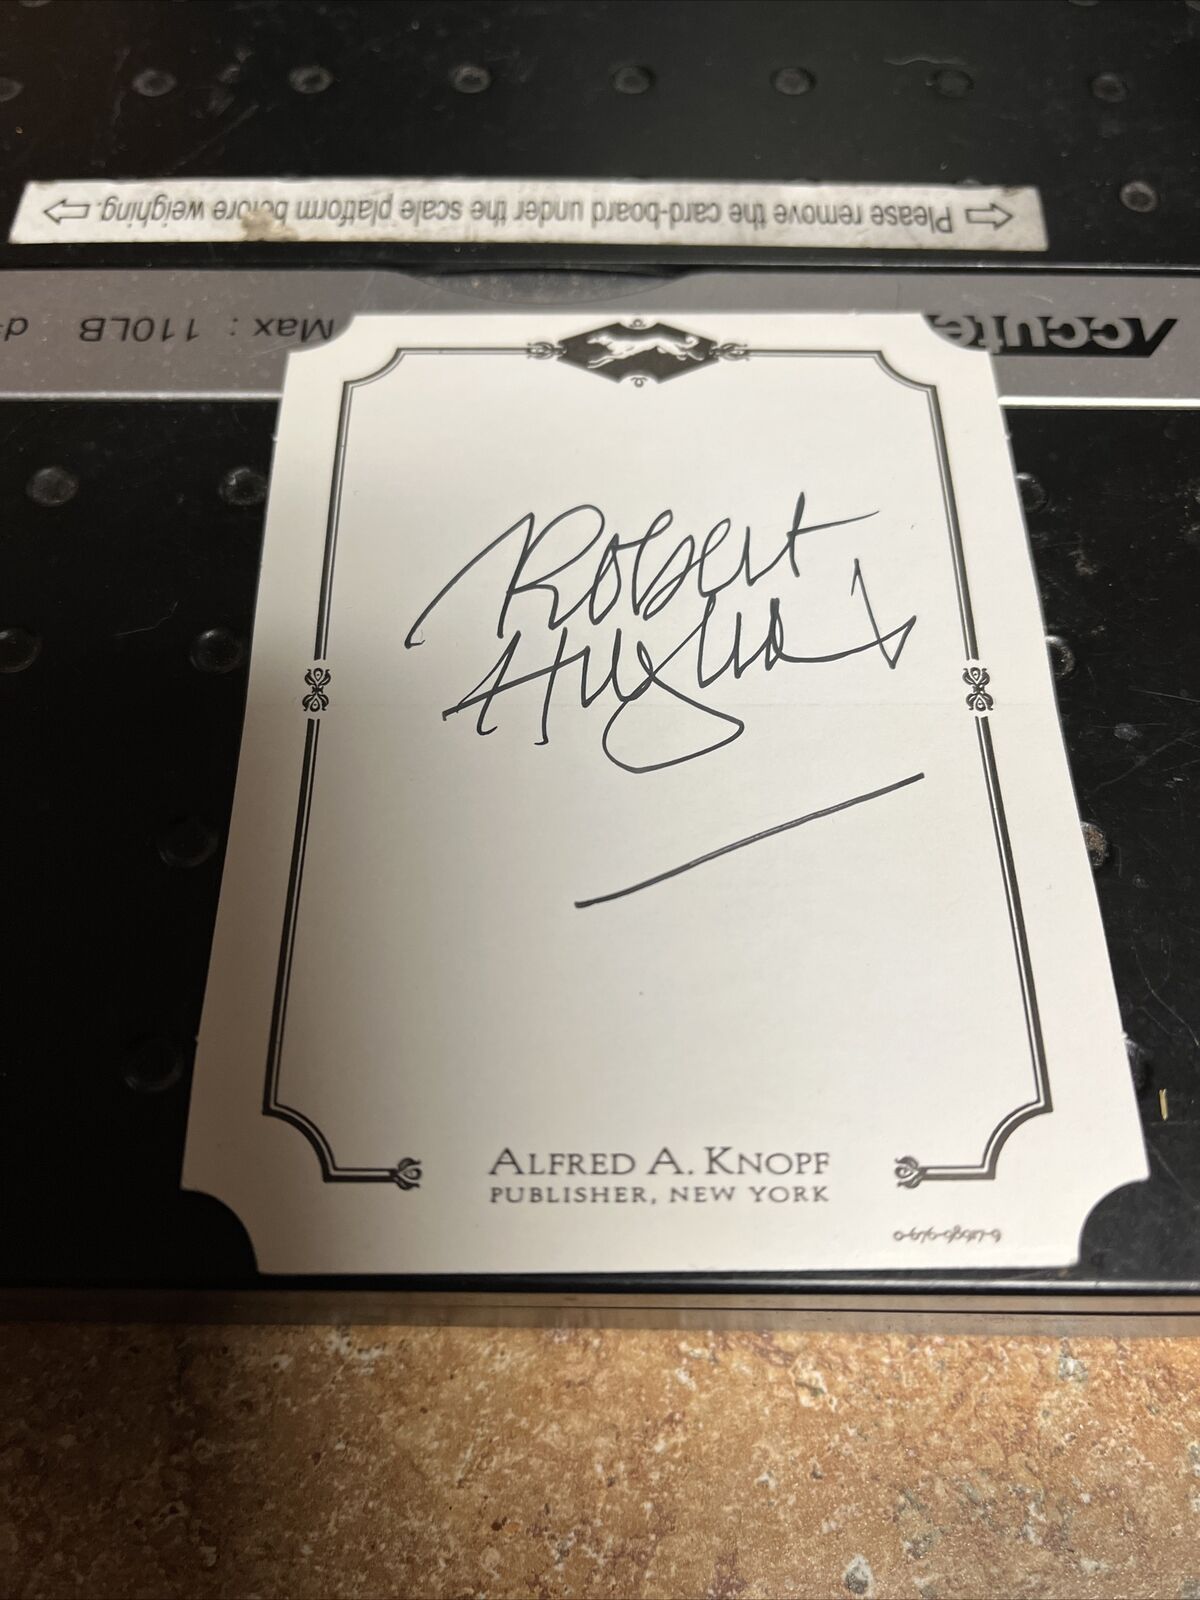 SIGNED Signature Autograph ROBERT  HUGHES Bookplate Book Plate Alfred A. Knopf